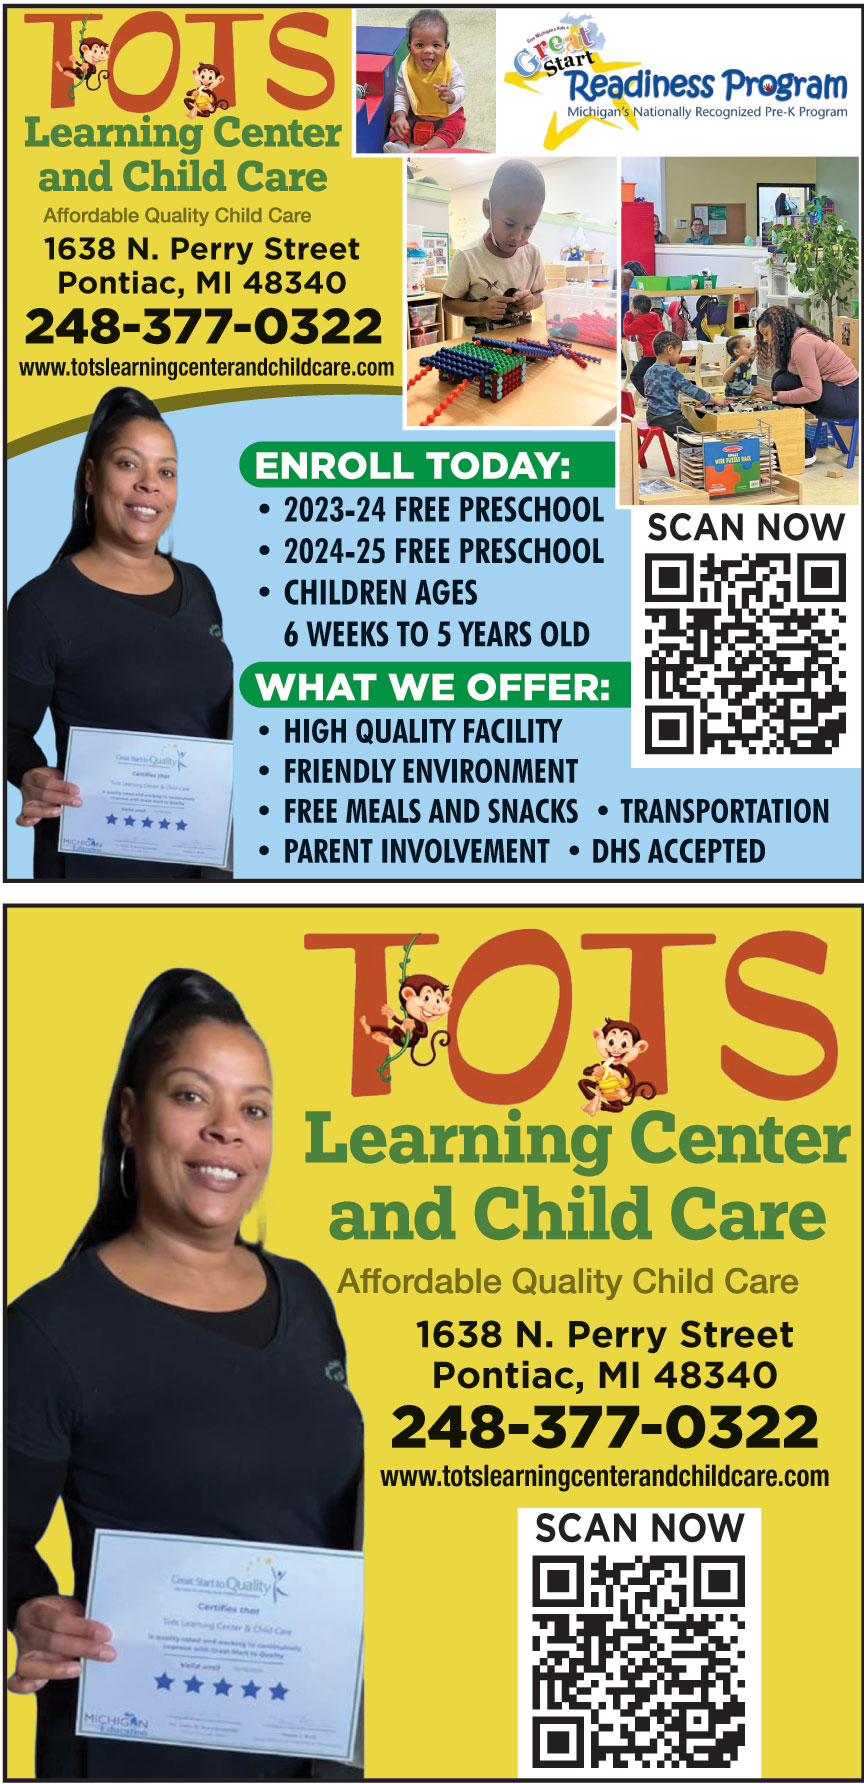 TOTS LEARNING CENTER